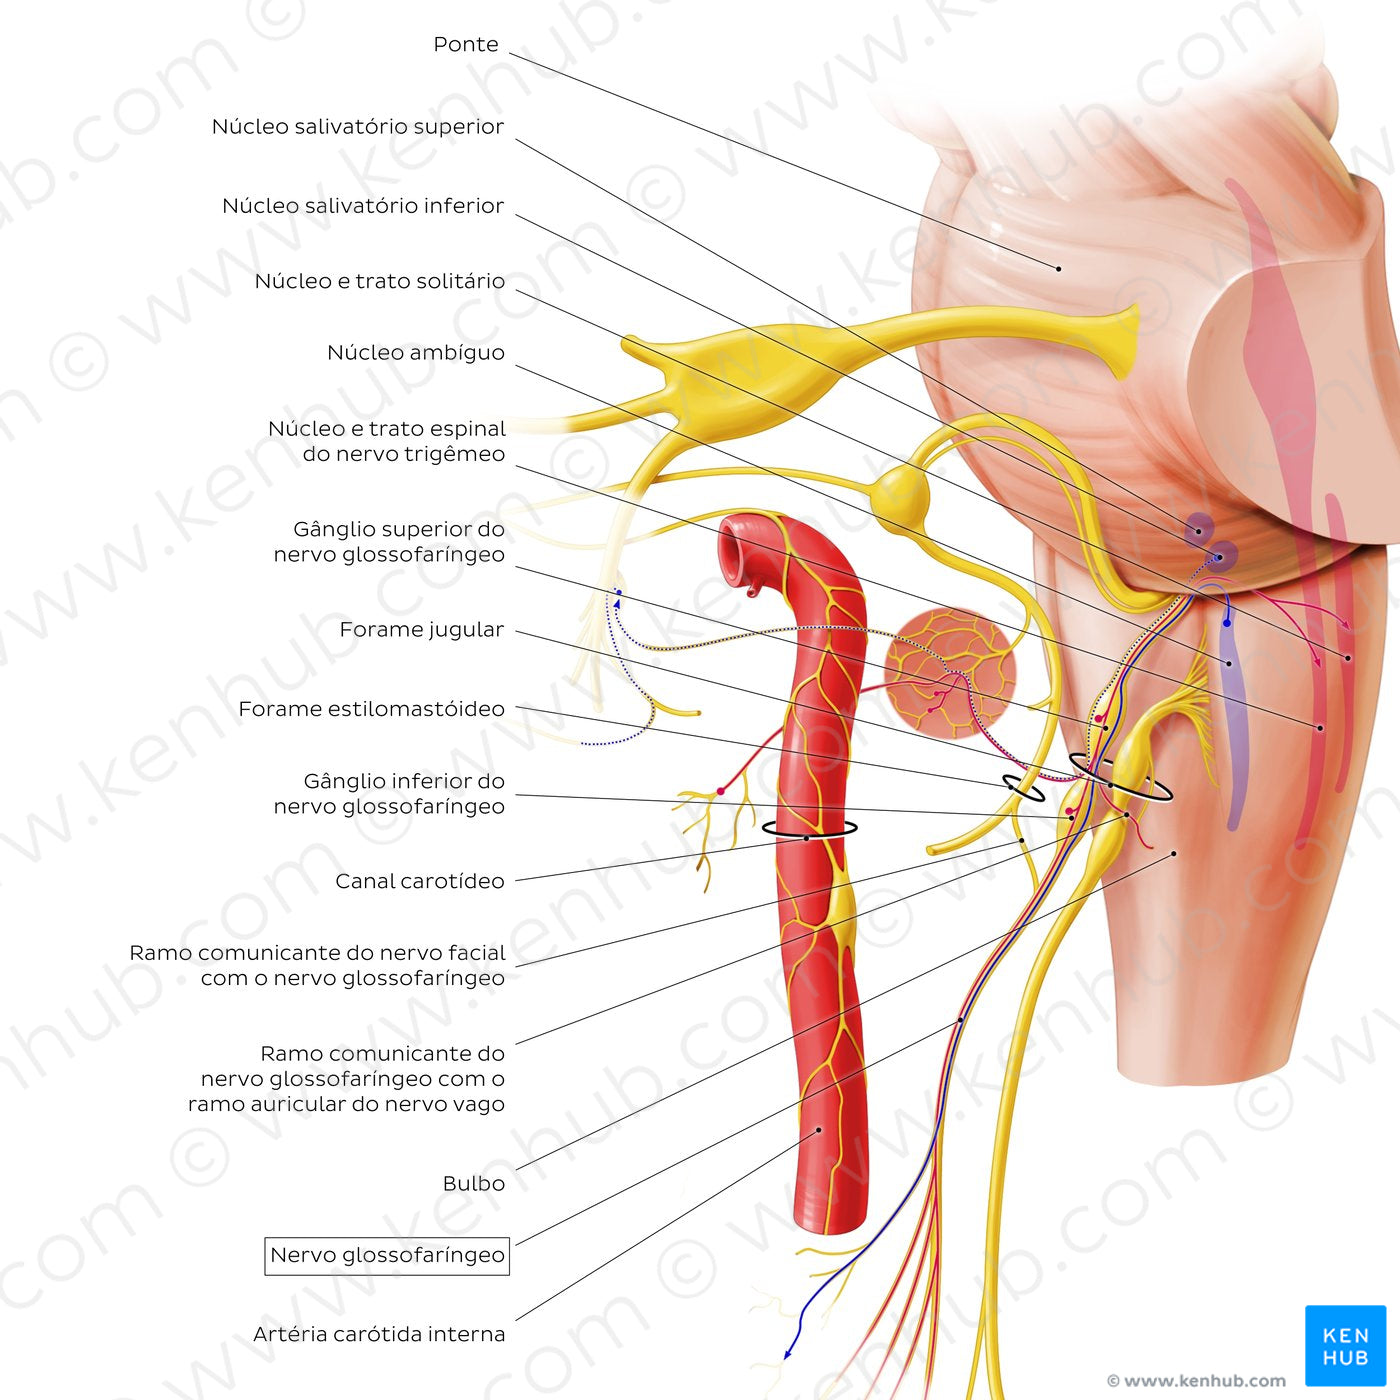 Glossopharyngeal nerve (origin and proximal branches) (Portuguese)